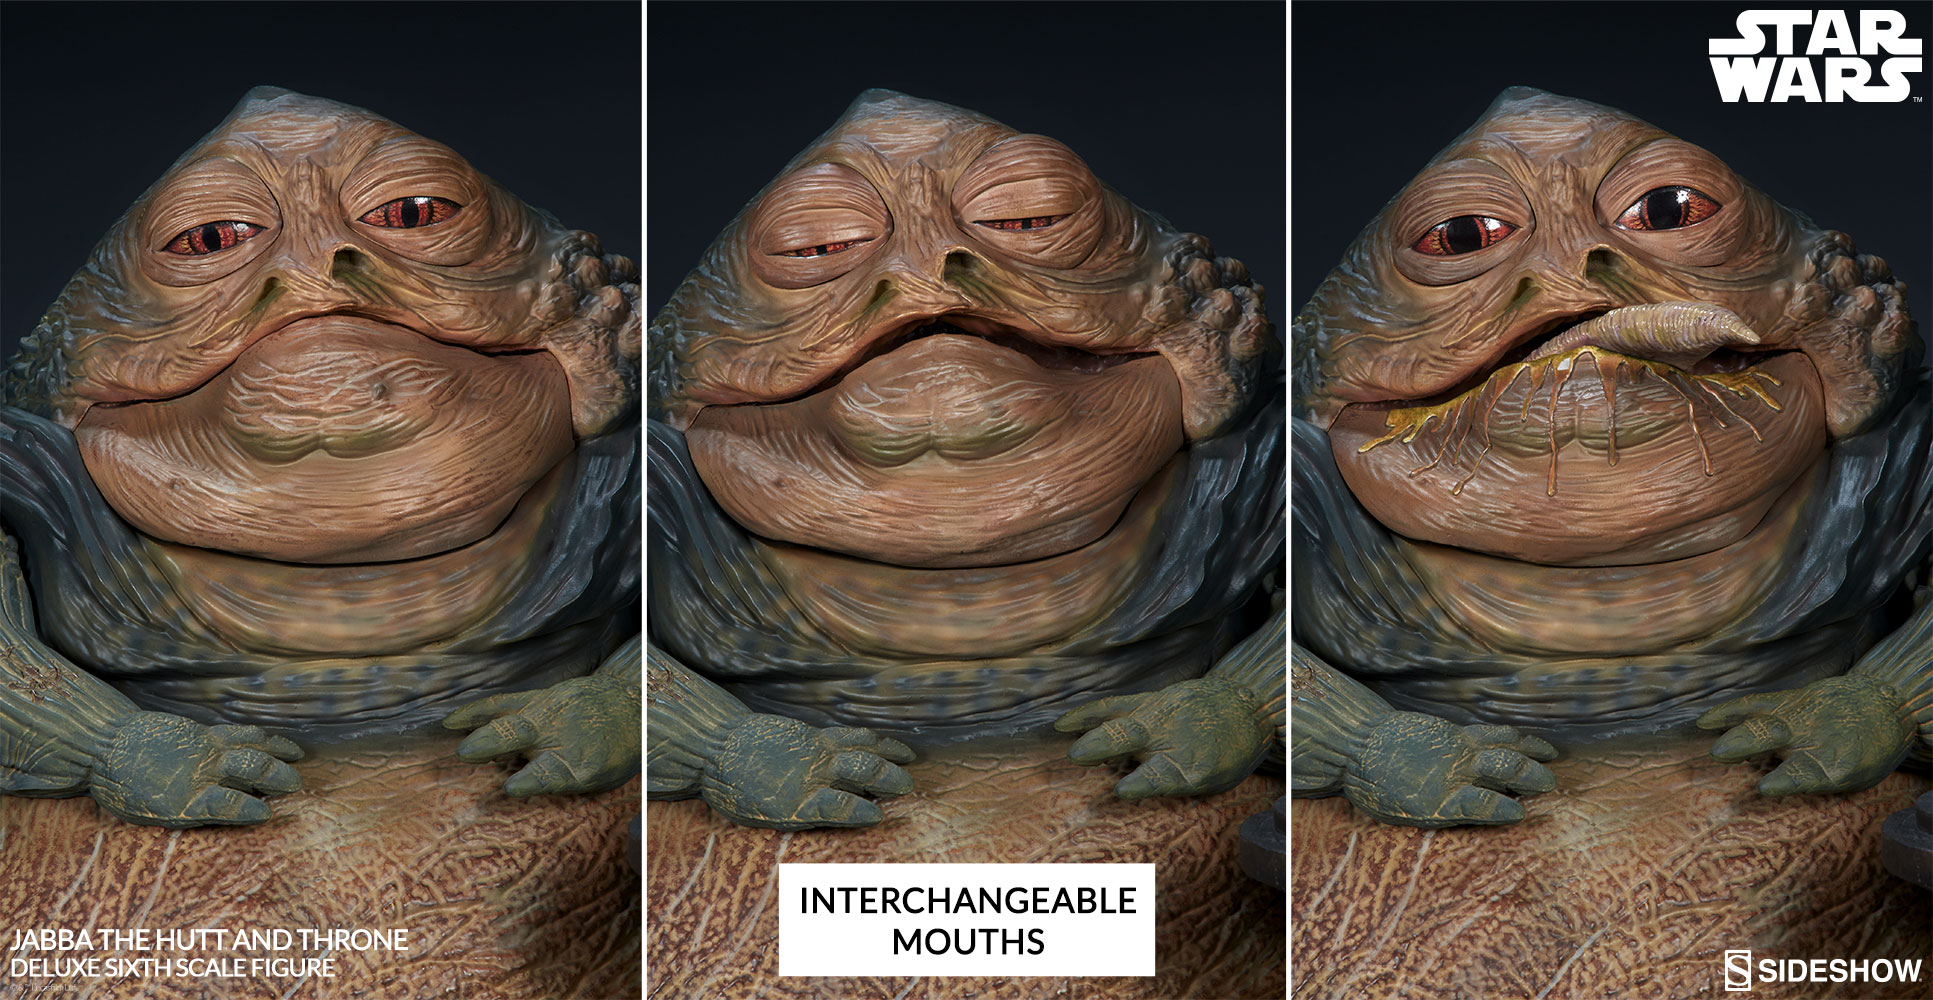 star-wars-jabba-the-hutt-and-throne-deluxe-sixth-scale-figure-sideshow-100410-06.jpg